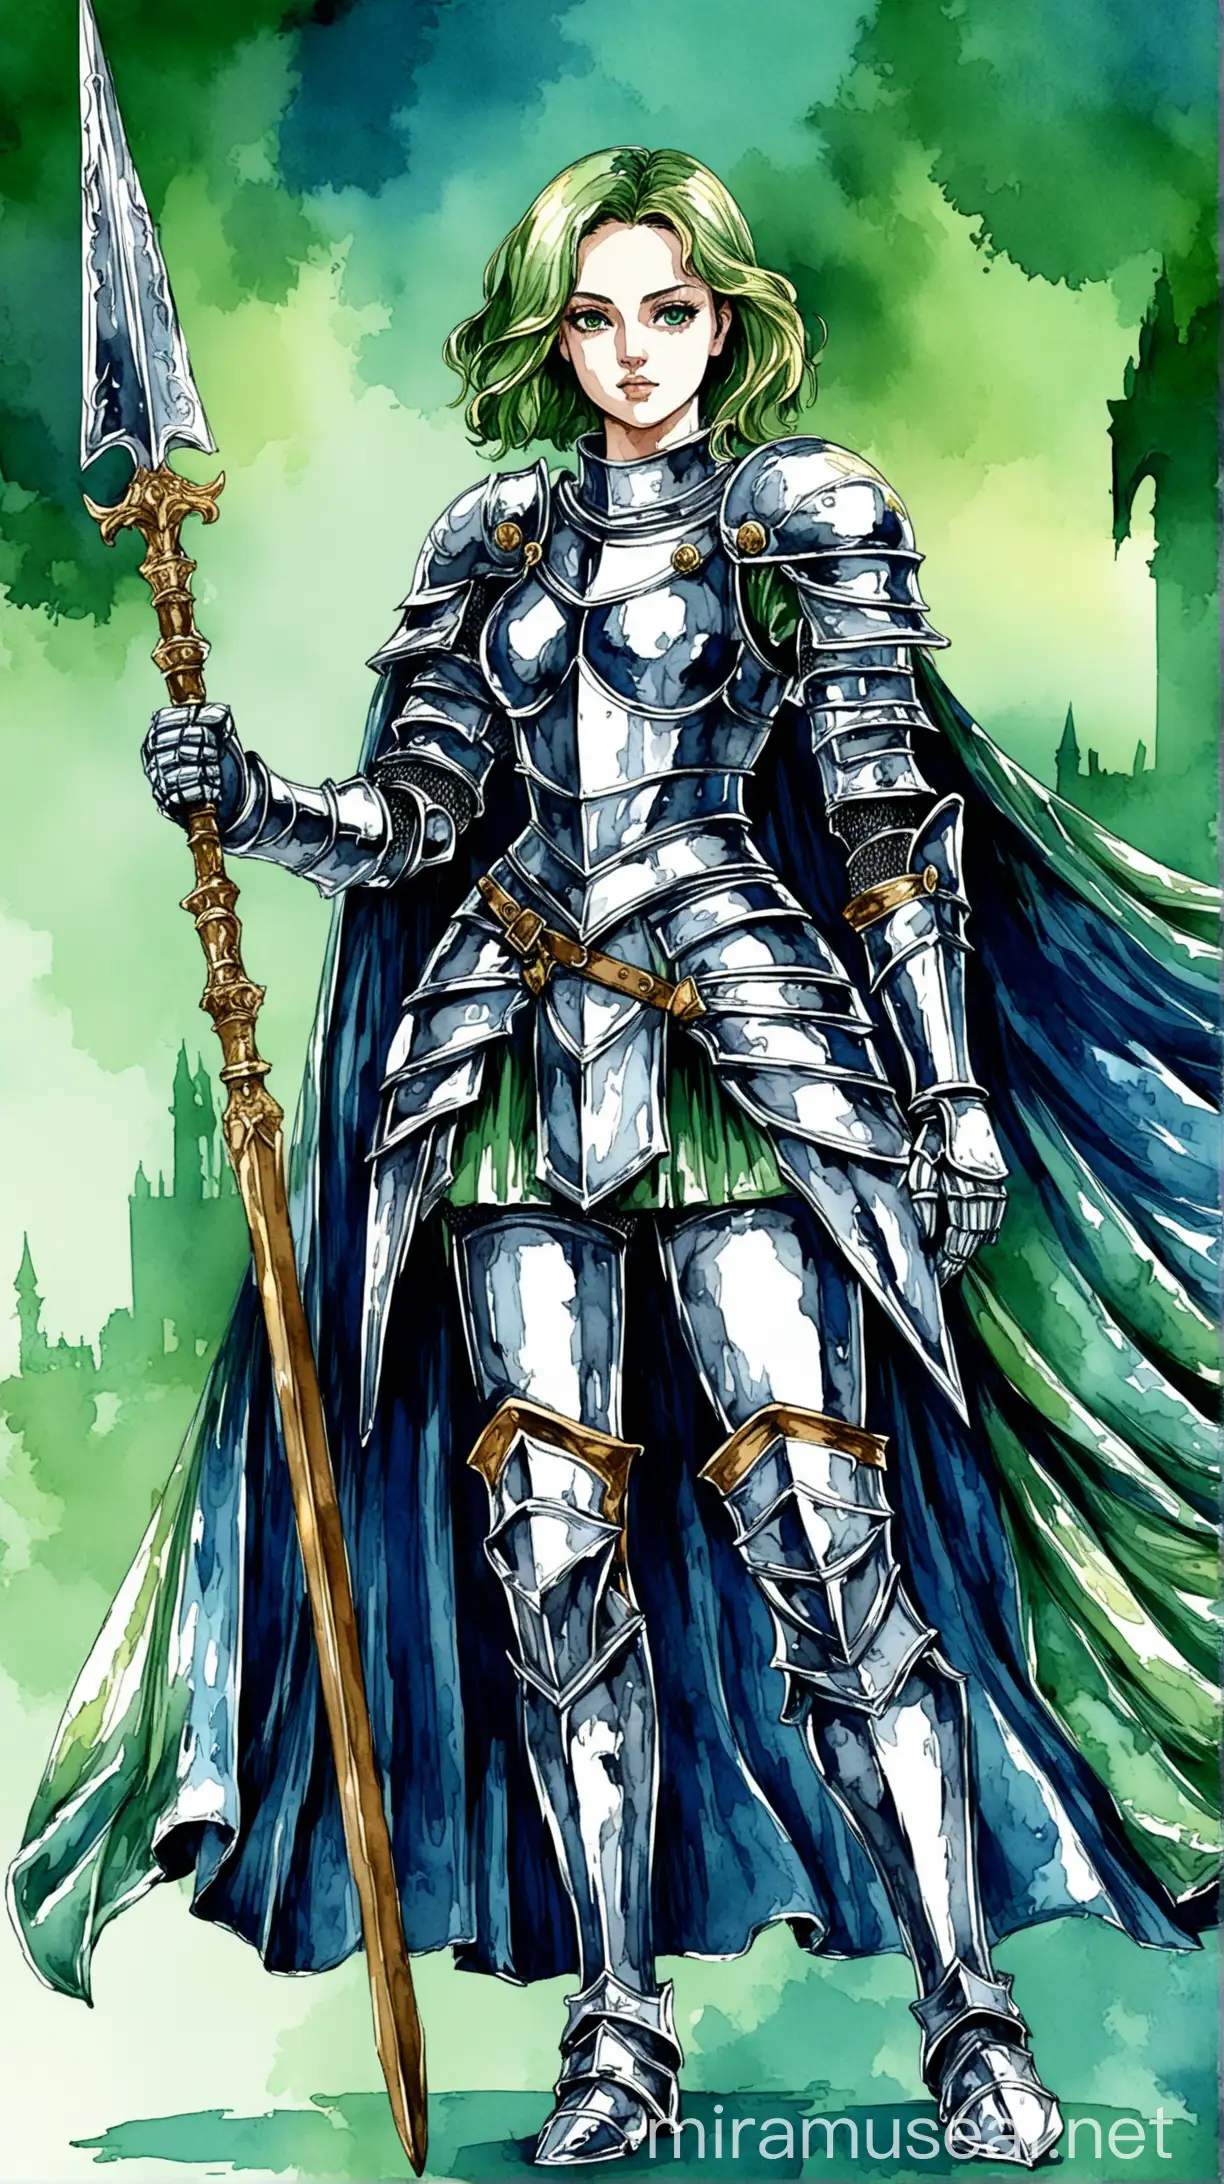 Elegant Female Knight with Spear in Enchanting Watercolor Background